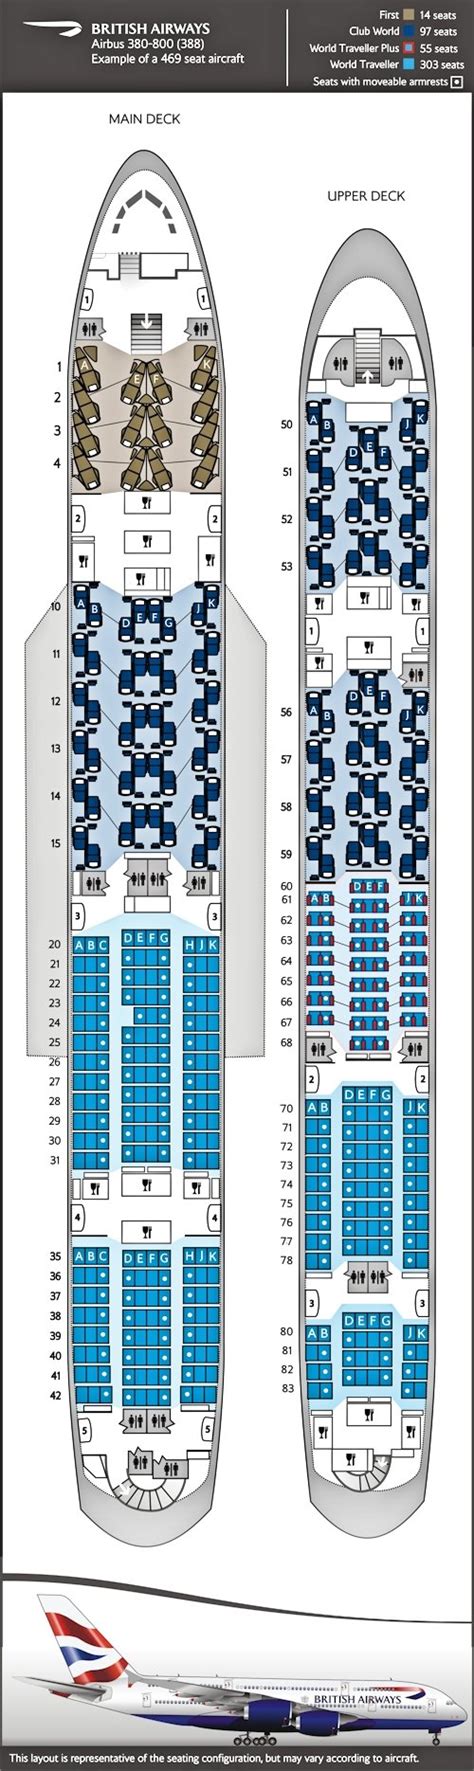 british airways boeing 787 and airbus a380 seat map observations frequently flying